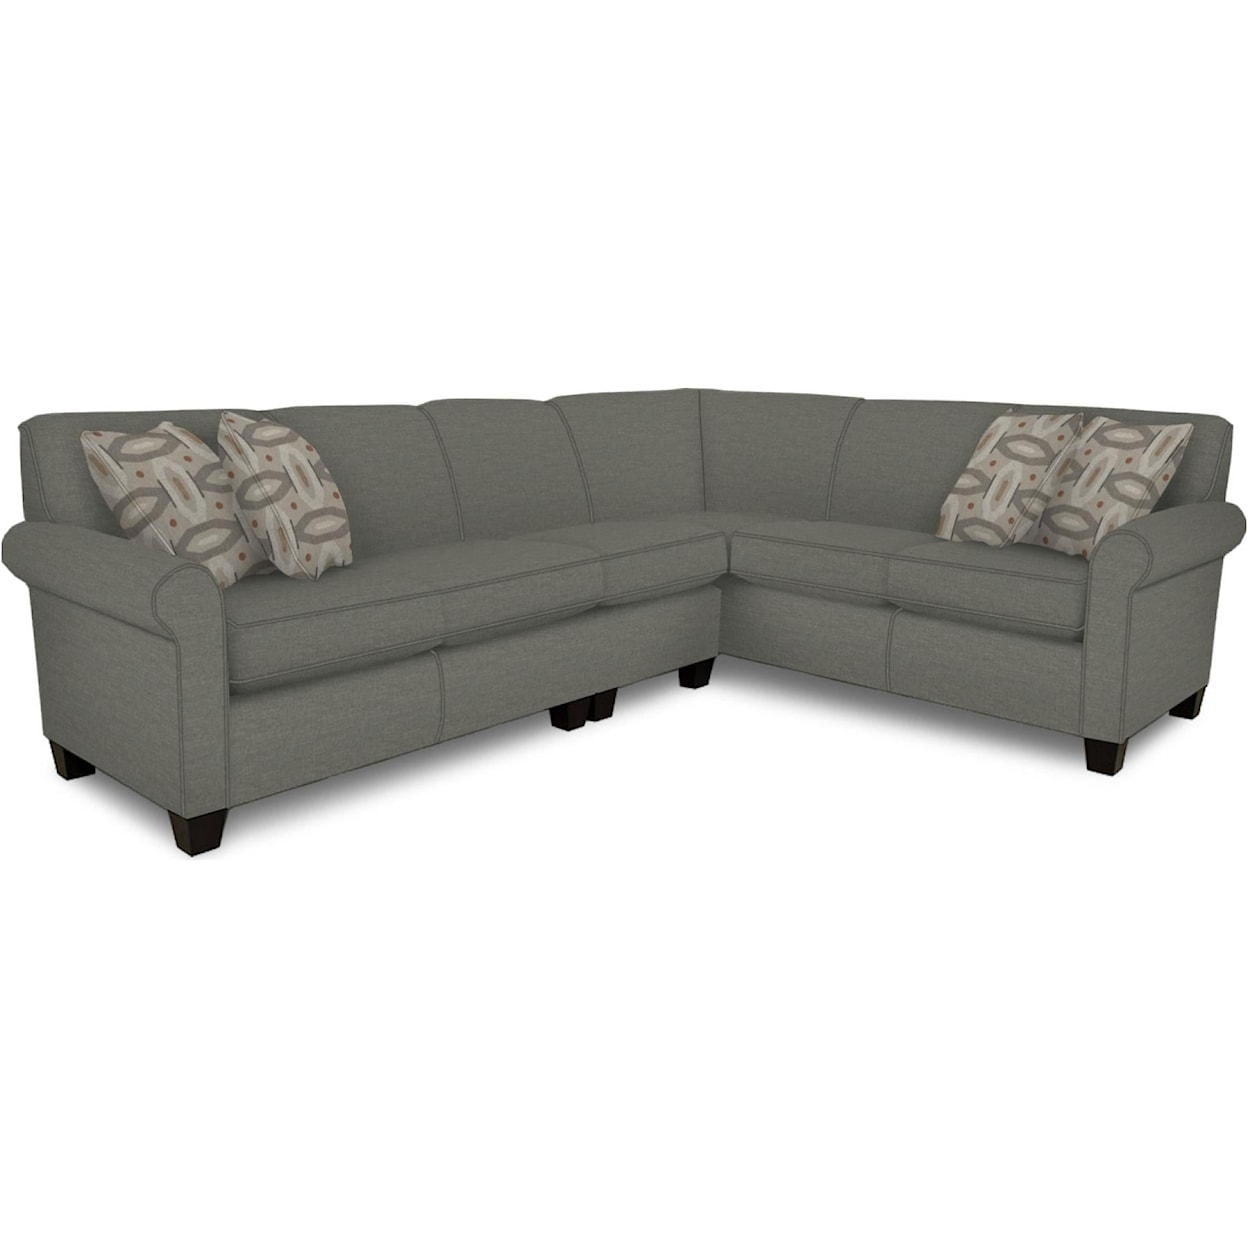 England 4630/LS Series L-Shaped Sectional